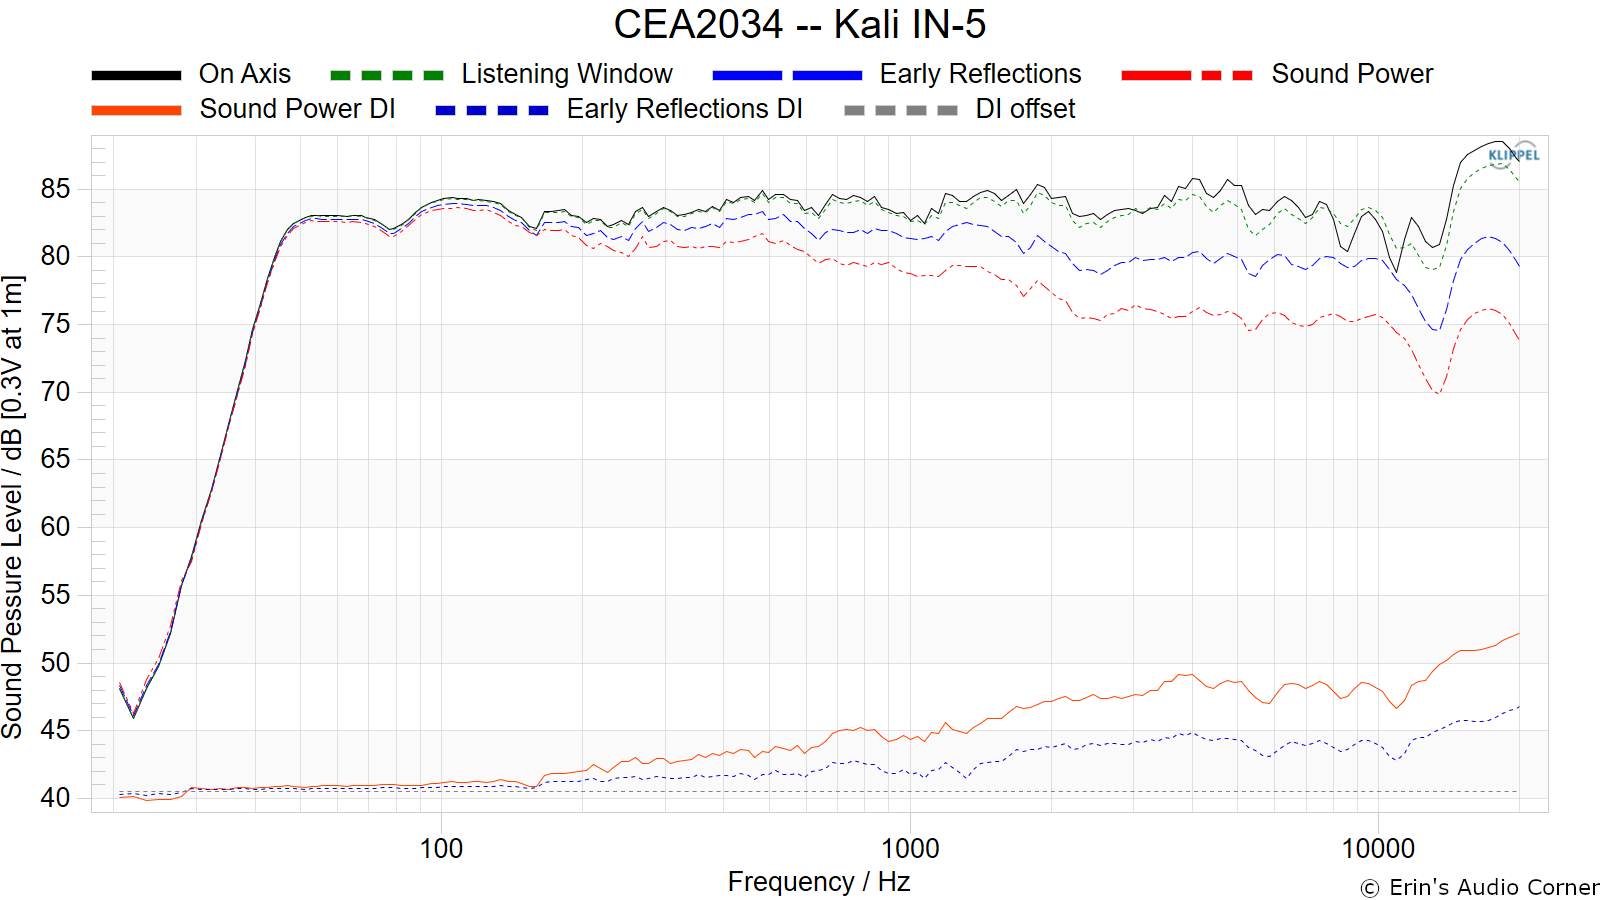 CEA2034%20--%20Kali%20IN-5.png